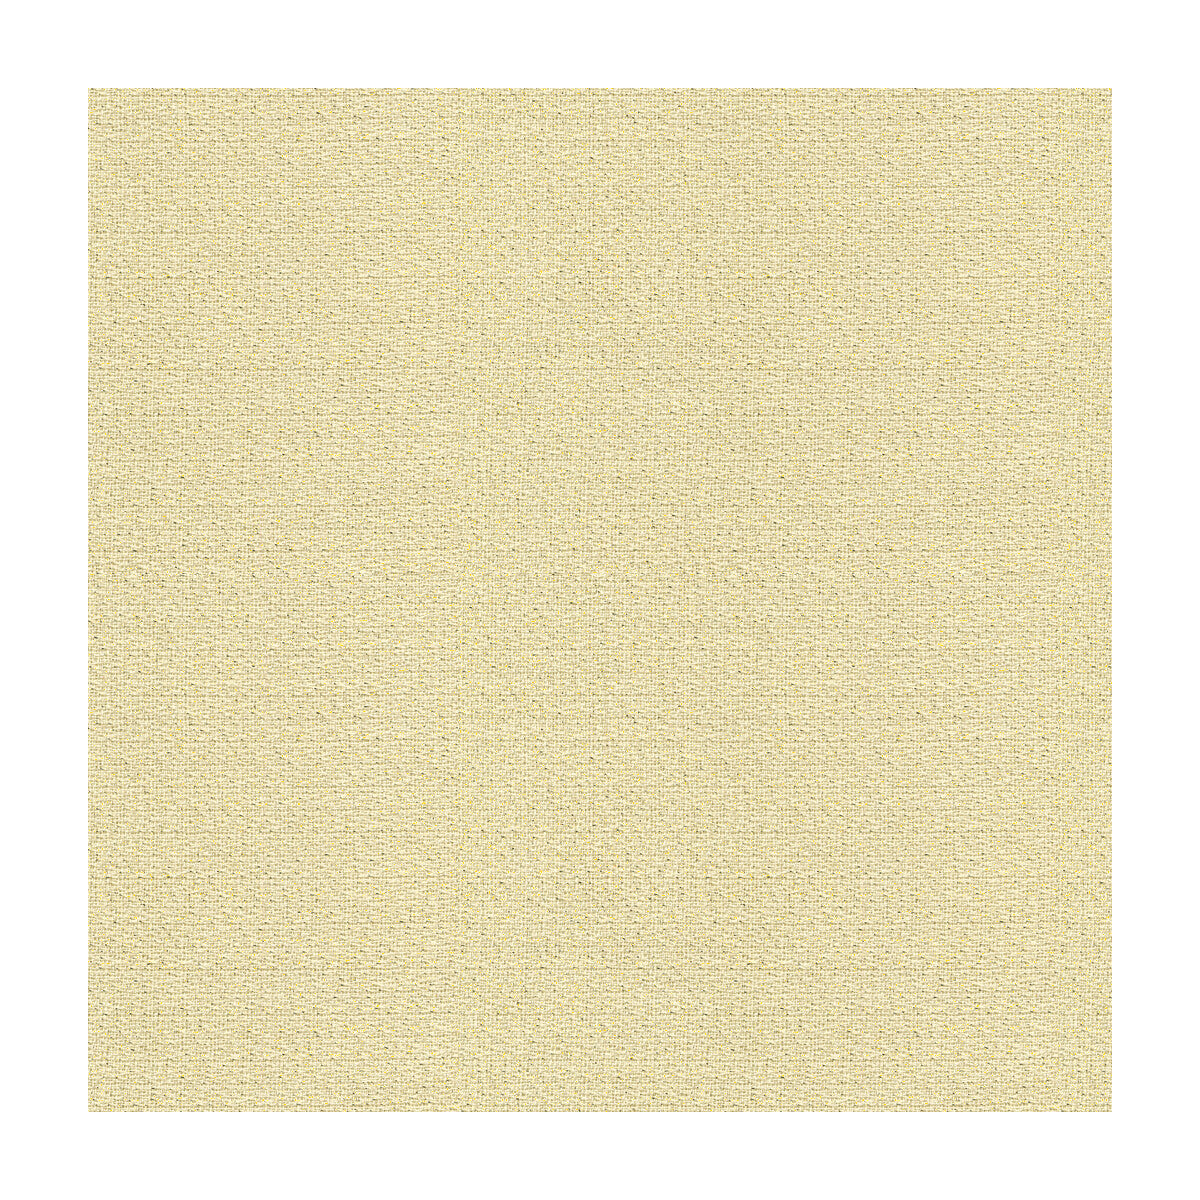 Glisten Wool fabric in ivory/silver color - pattern GWF-3045.101.0 - by Lee Jofa Modern in the Ventana Sheers collection